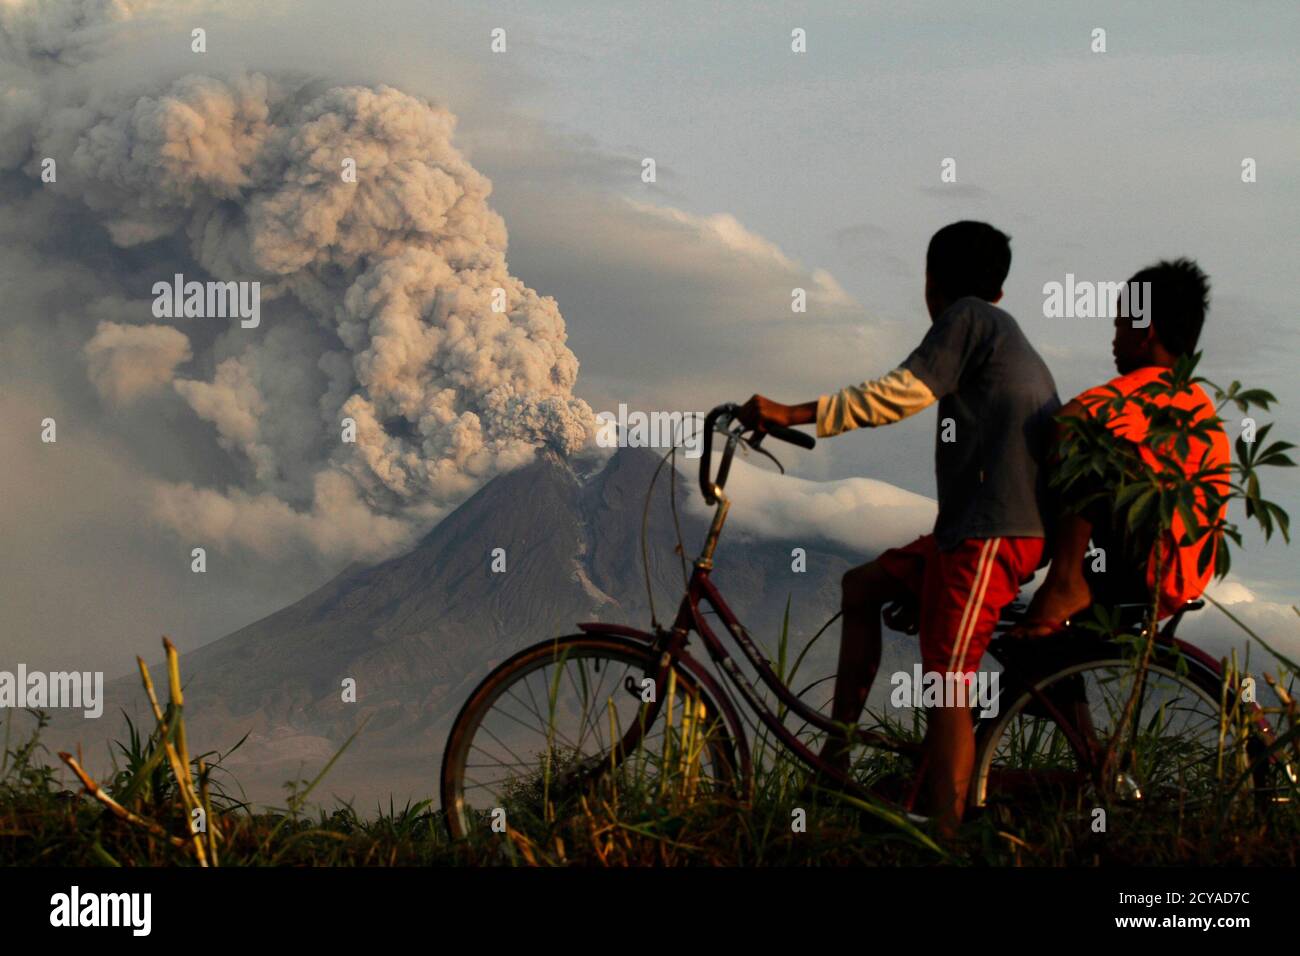 Boys look at the eruption of Mount Merapi volcano in Manisrenggo village, in the Klaten district of Indonesia's central Java province November 10, 2010. Mount Merapi showed lethargic signs on Wednesday but authorities would not lower down its alert status because of its intense seismic activities, the head of the country's vulcanolology agency said. REUTERS/Andry Prasetyo (INDONESIA - Tags: DISASTER ENVIRONMENT IMAGES OF THE DAY) Stock Photo